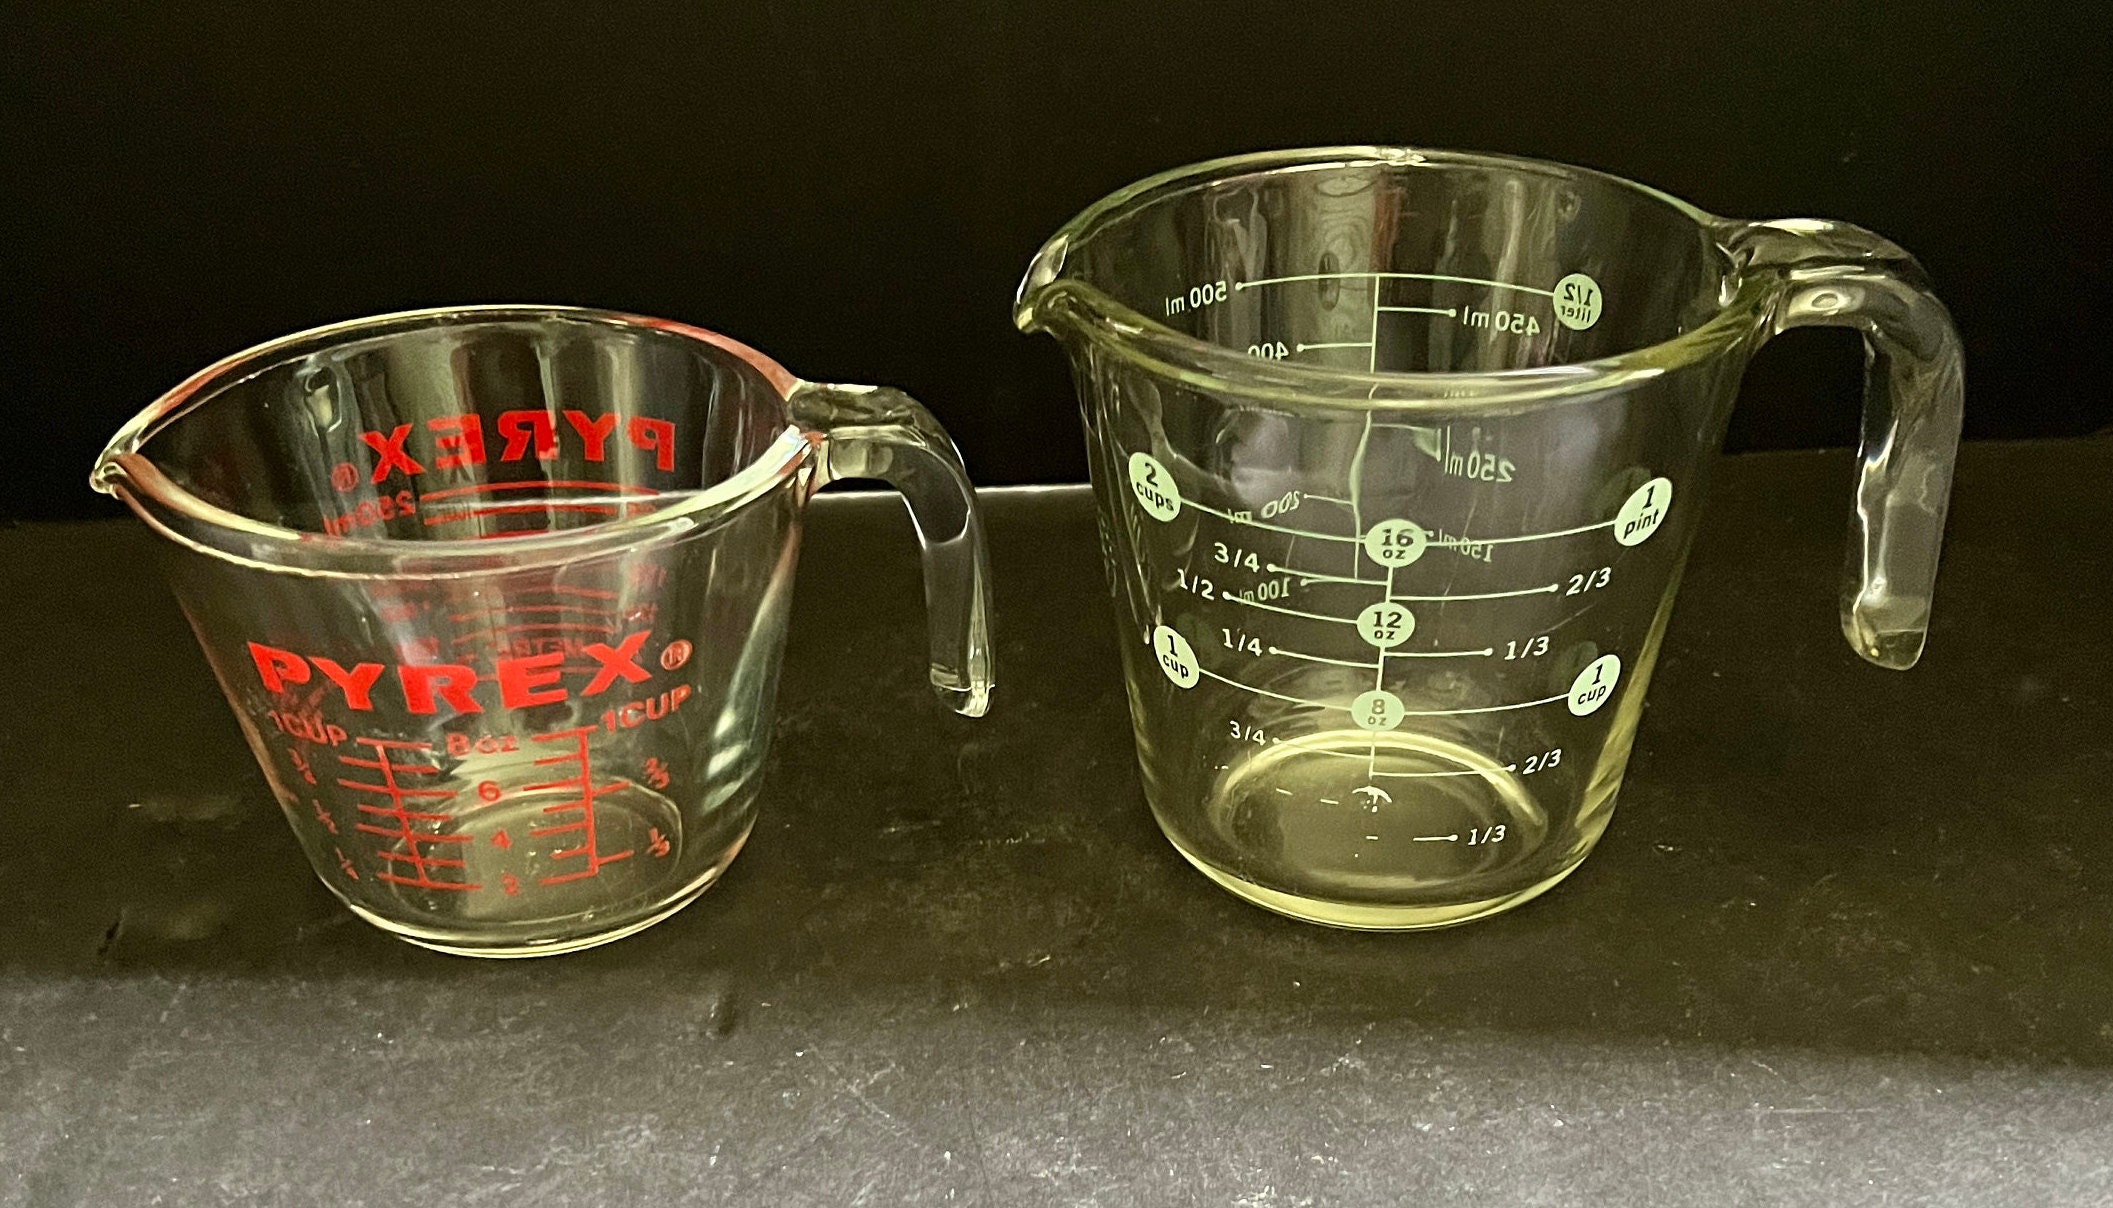 Beyond Measure – 4-Cup Glass Measuring Cup